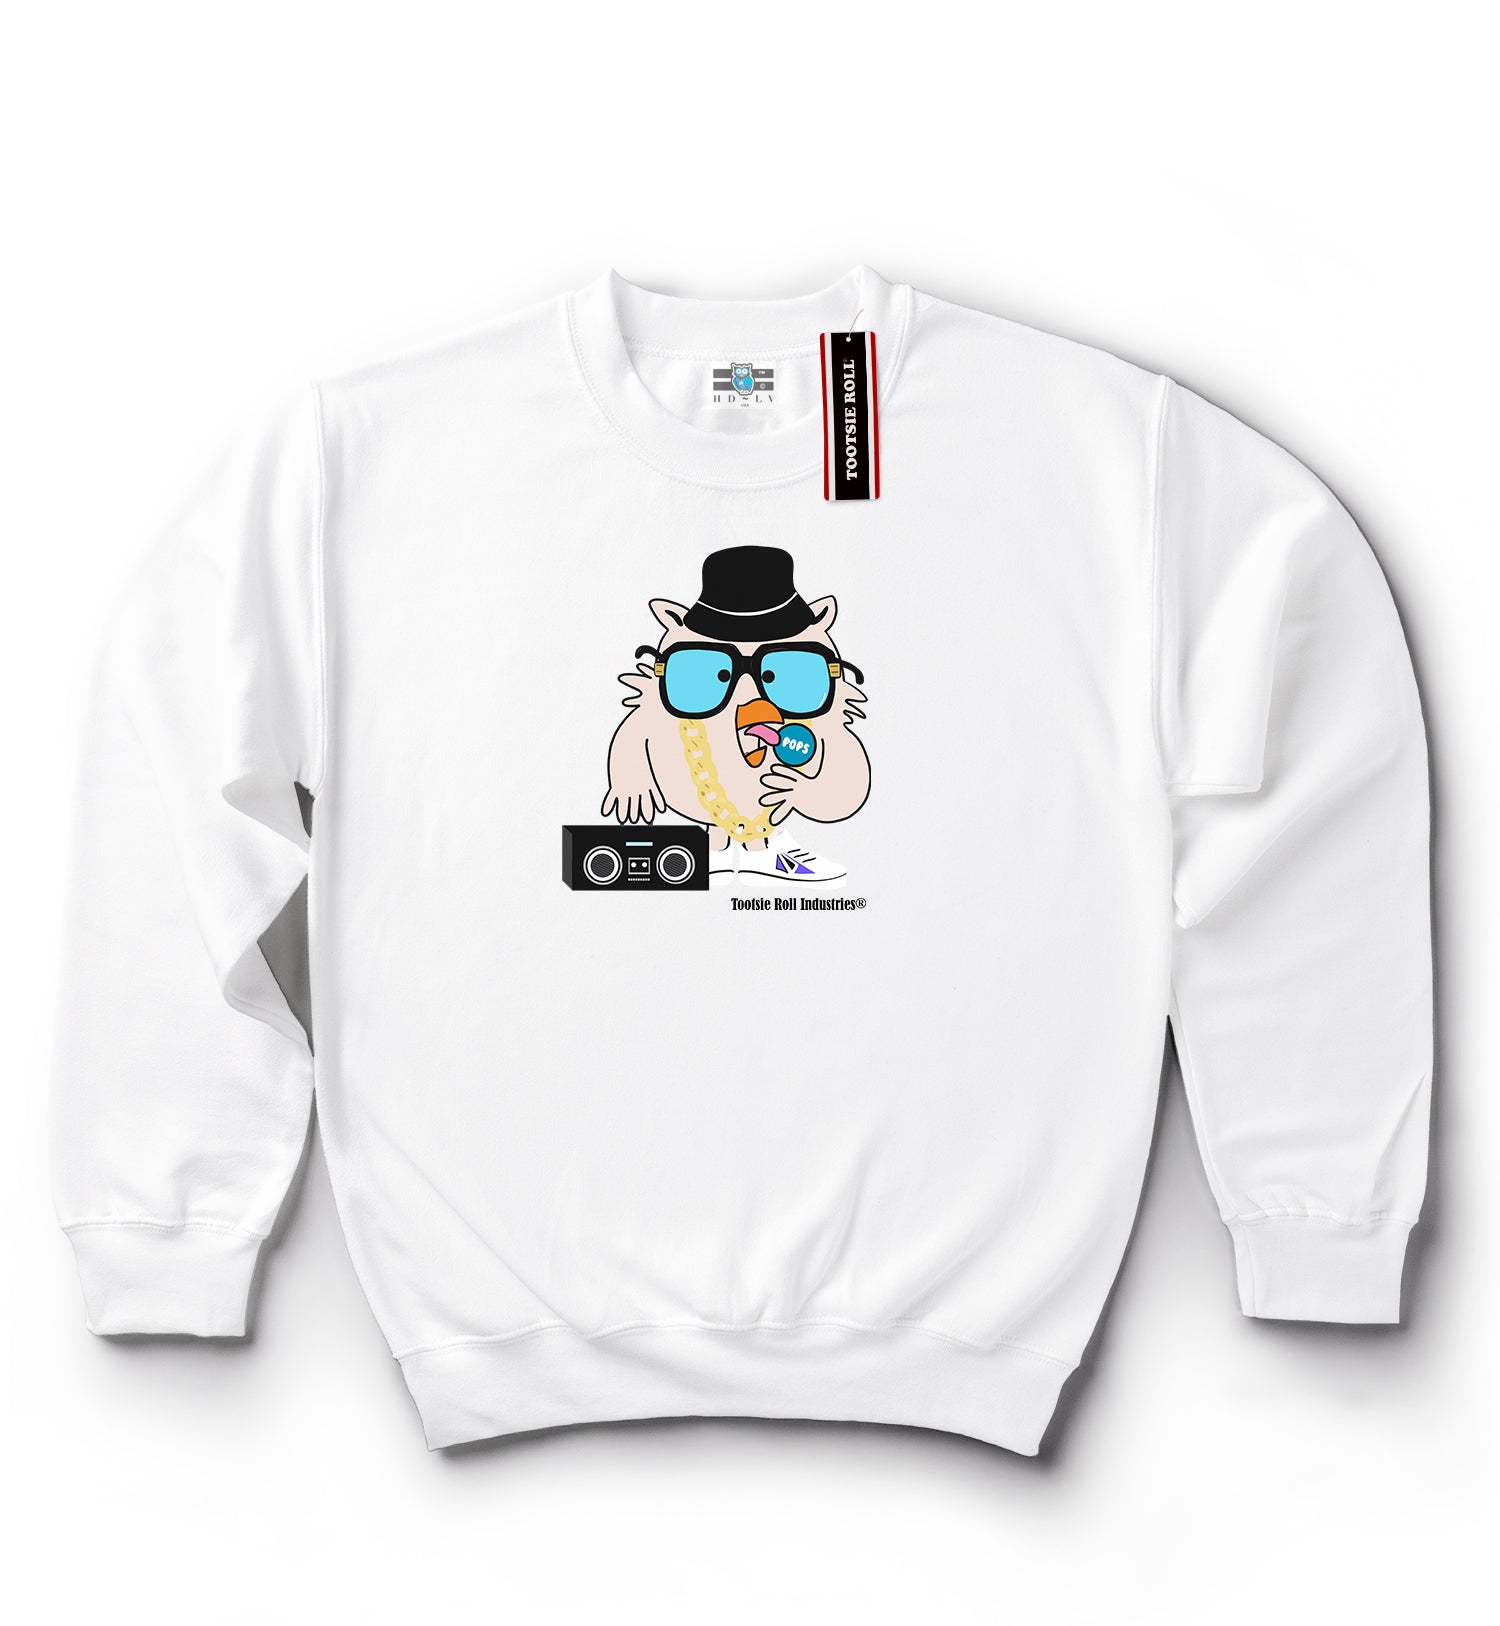 Shop and Buy 1990s Inspired Clothes | Tootsie Roll | Hip-Hop Mr. Owl | Crew Neck | Black